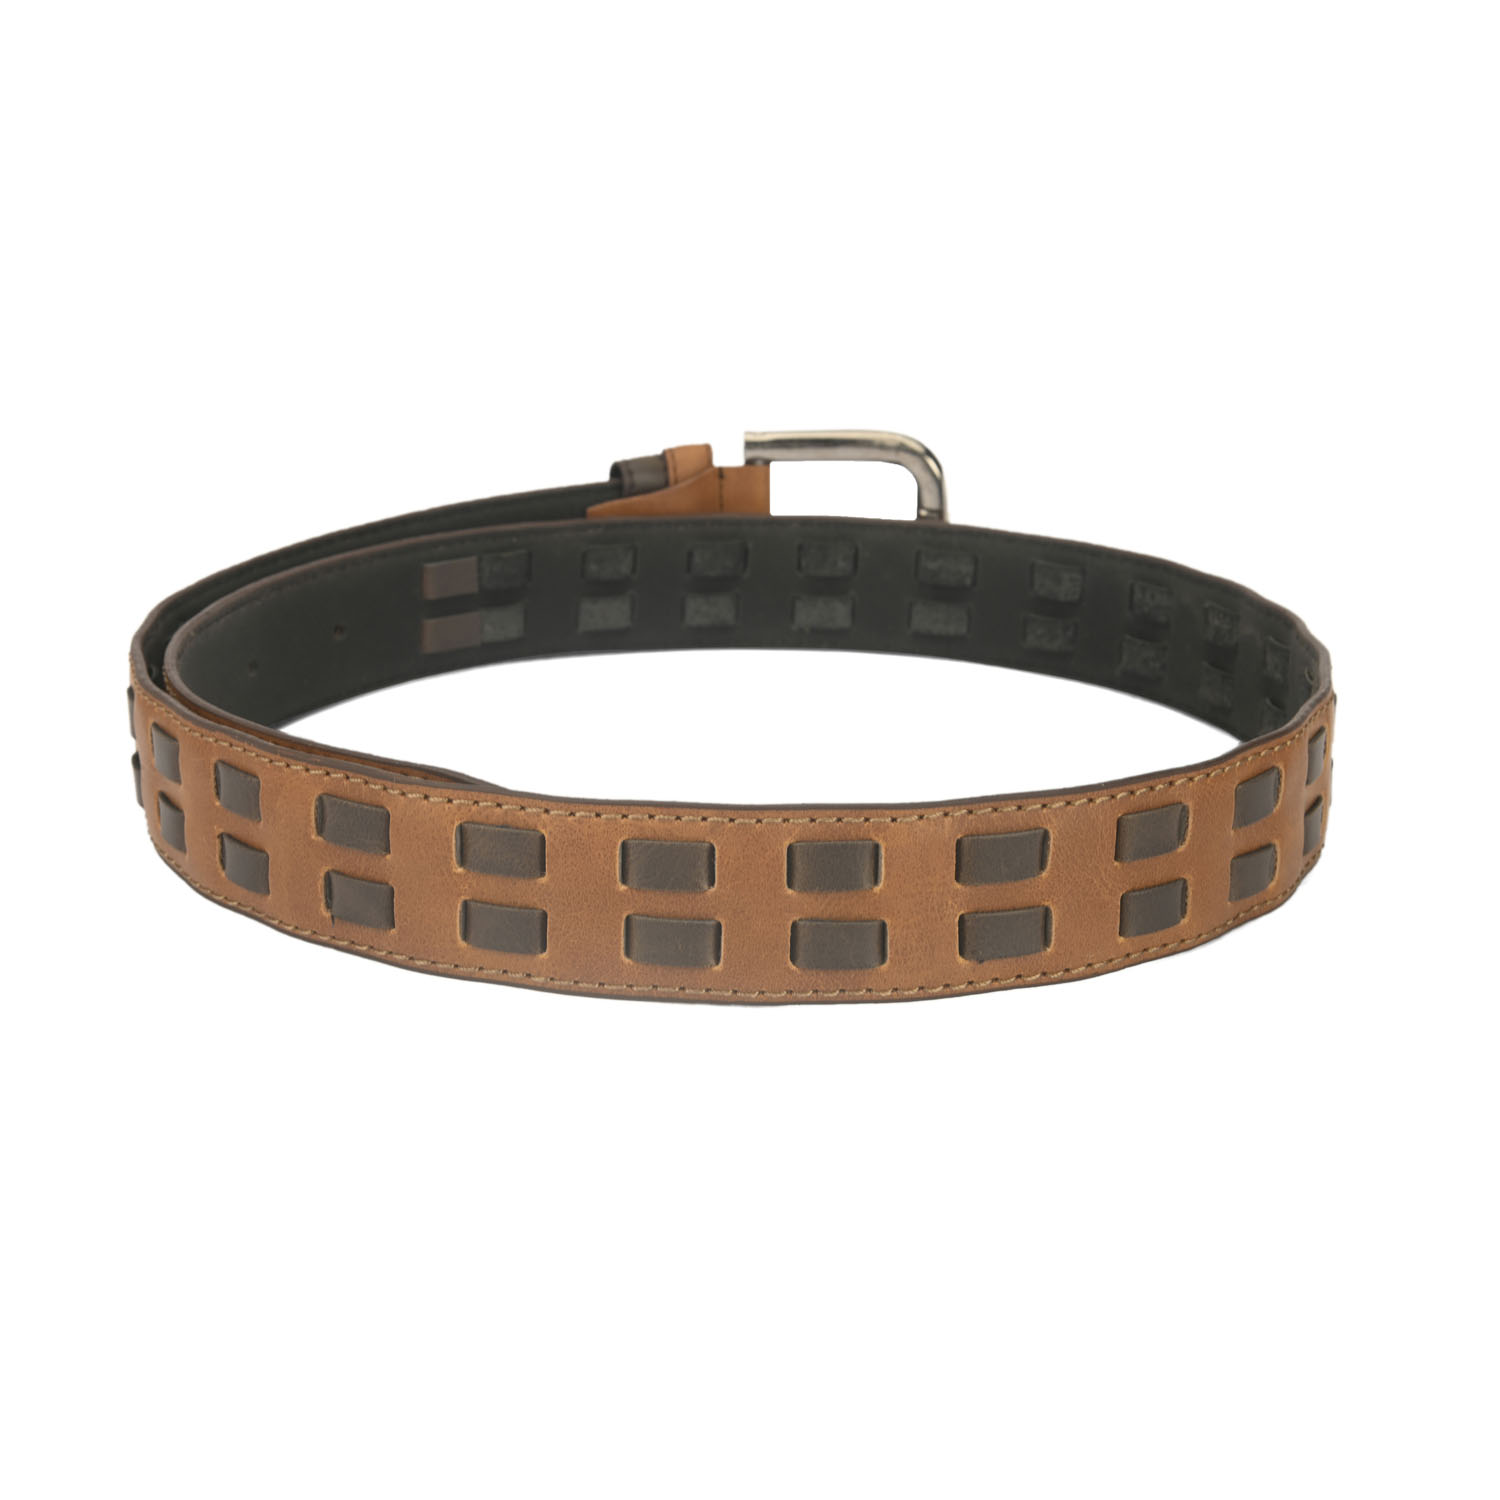 Men's Casual Textured Perforated Belt Tan - LZ-CB-102